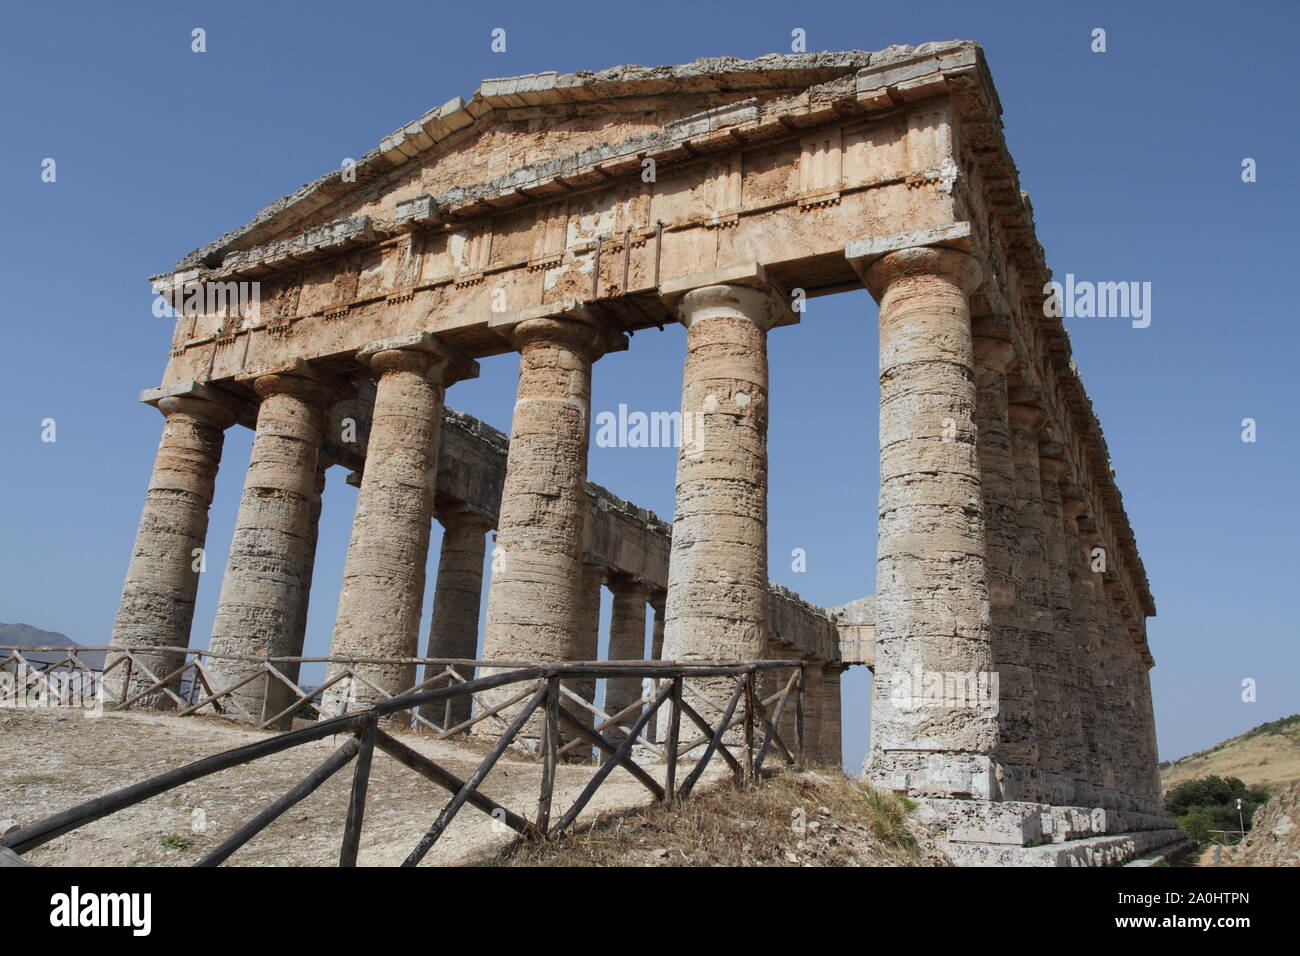 Calatafimi Segesta, Italy - 1 July 2016: The Doric style temple in the archaeological park of the ancient city of Segesta Stock Photo